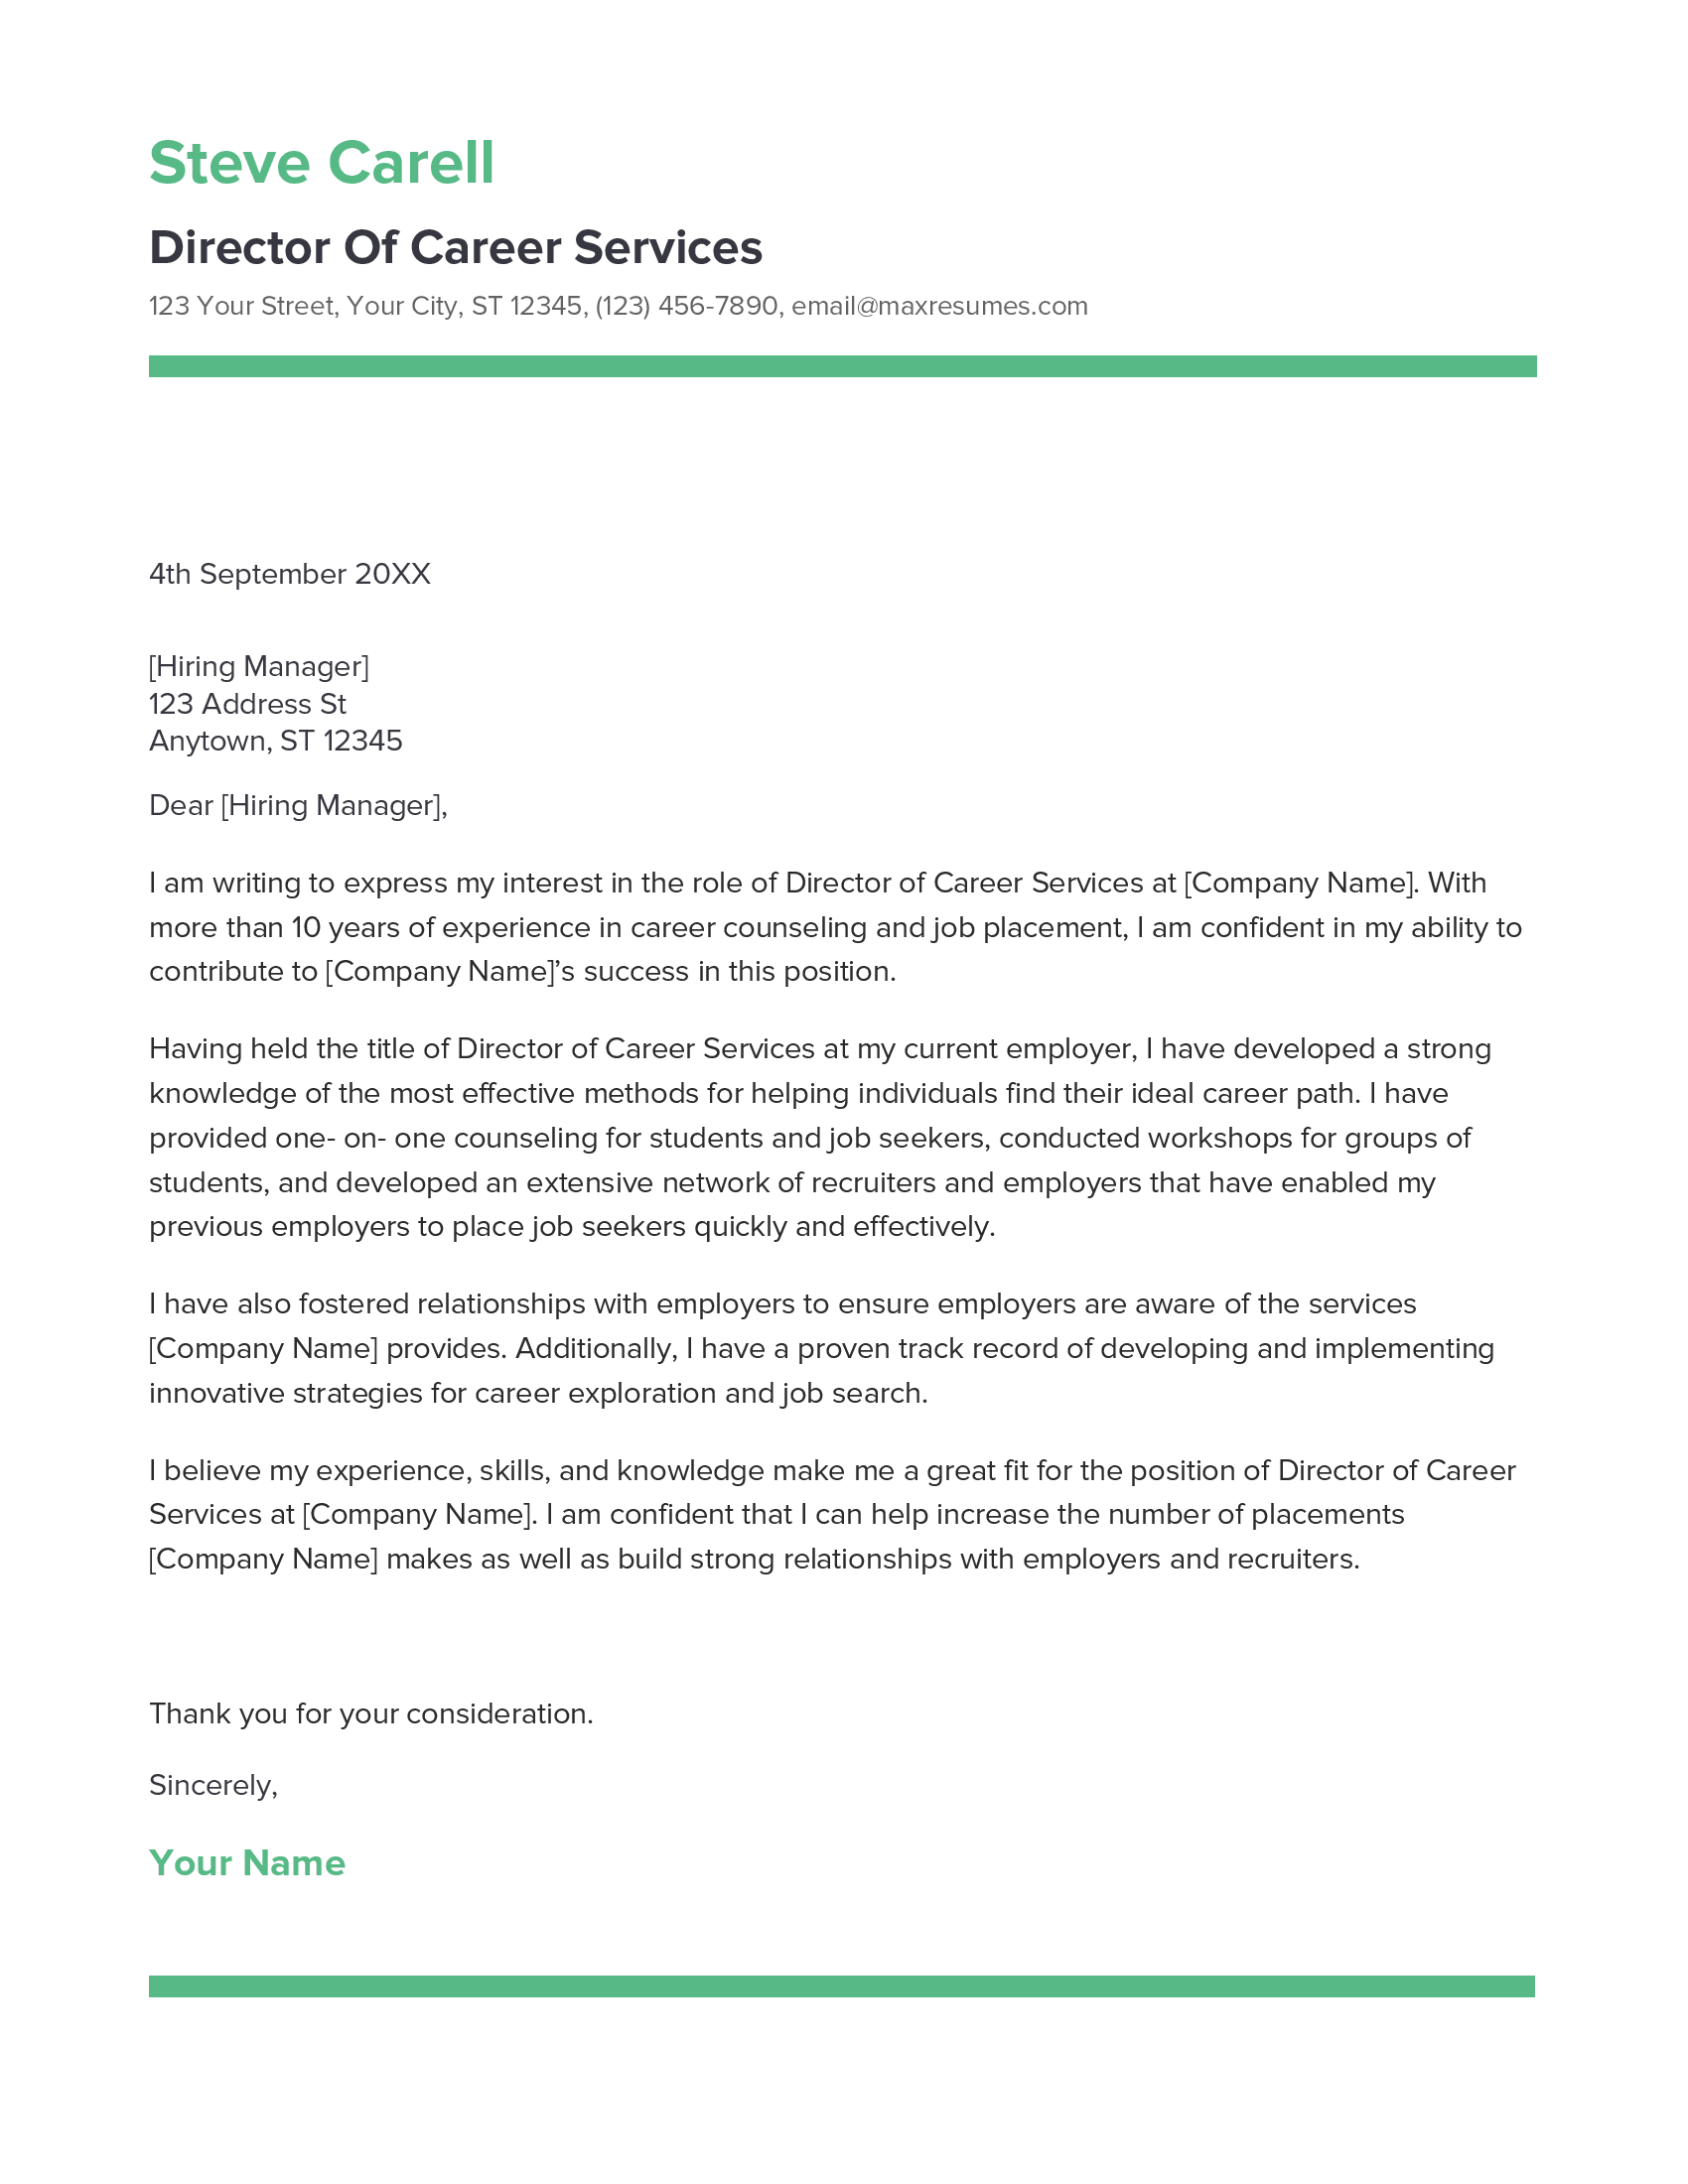 Director Of Career Services Cover Letter Example